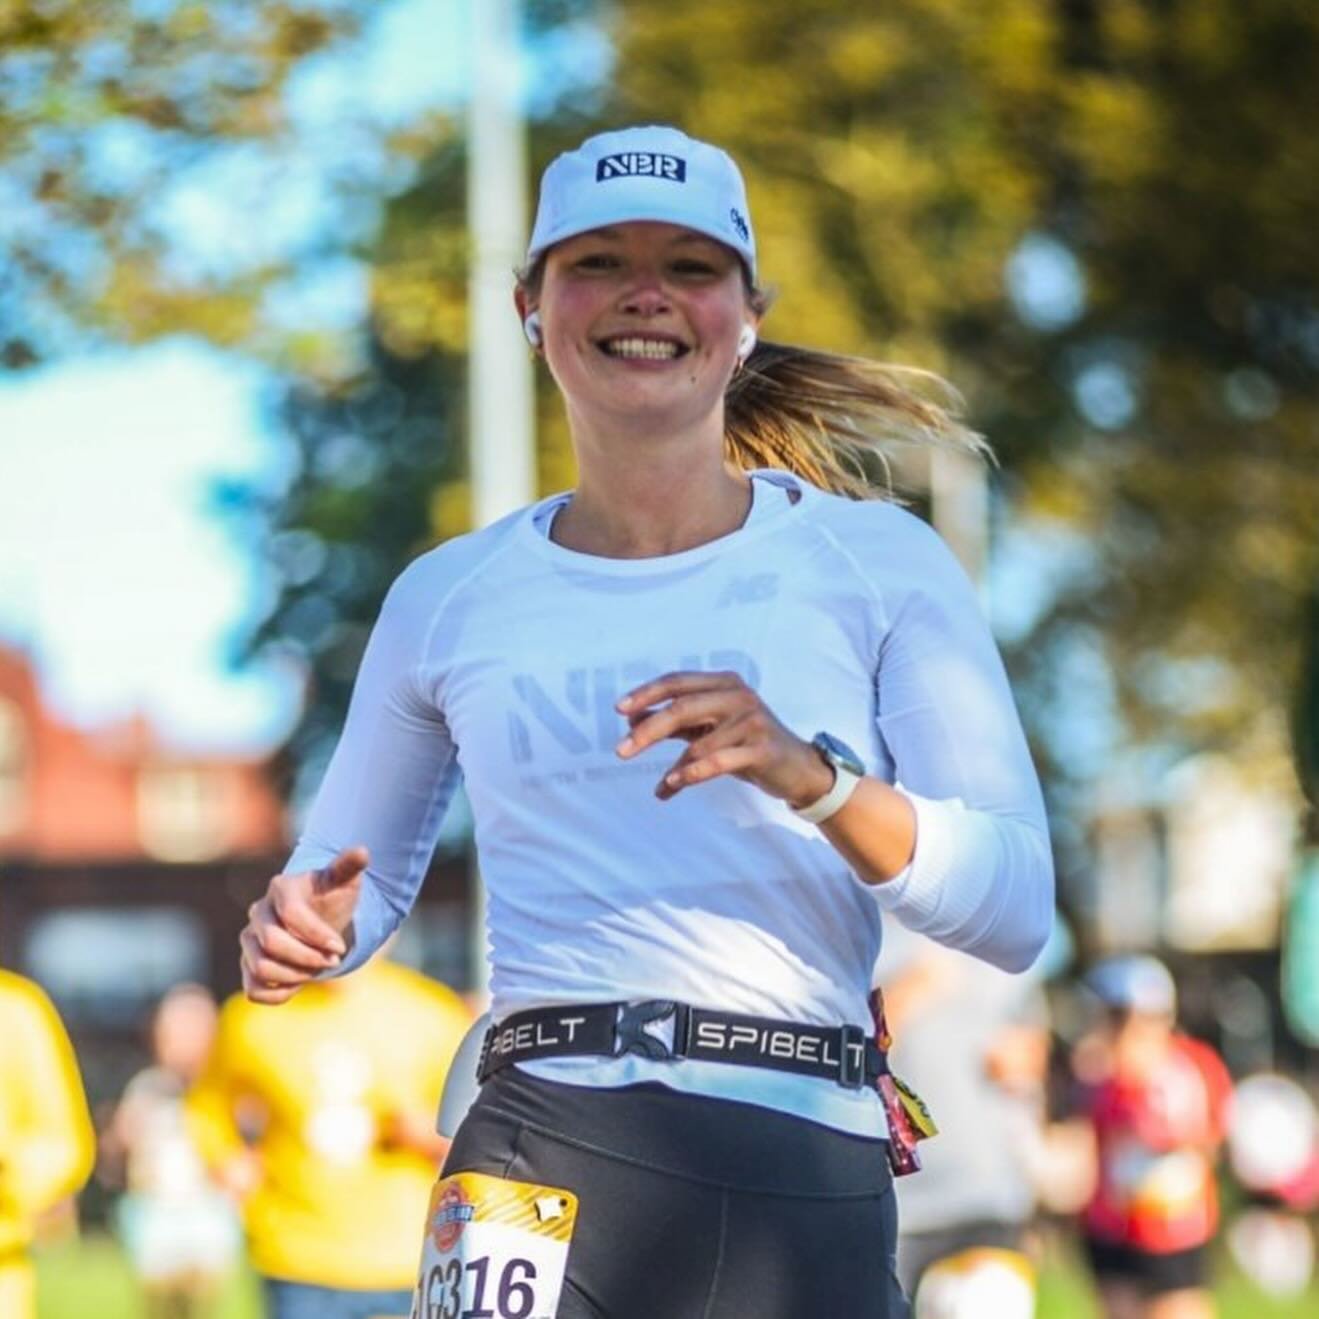 Meet Hannagh Jacobsen, our ☝️ May &lsquo;24 #RunnerOfTheMonth, who joined NBR in September 2022. Starting with a steep Saturday morning bridge run, she found accountability and a sense of community in Williamsburg.

Active in Friday food runs, Wednes